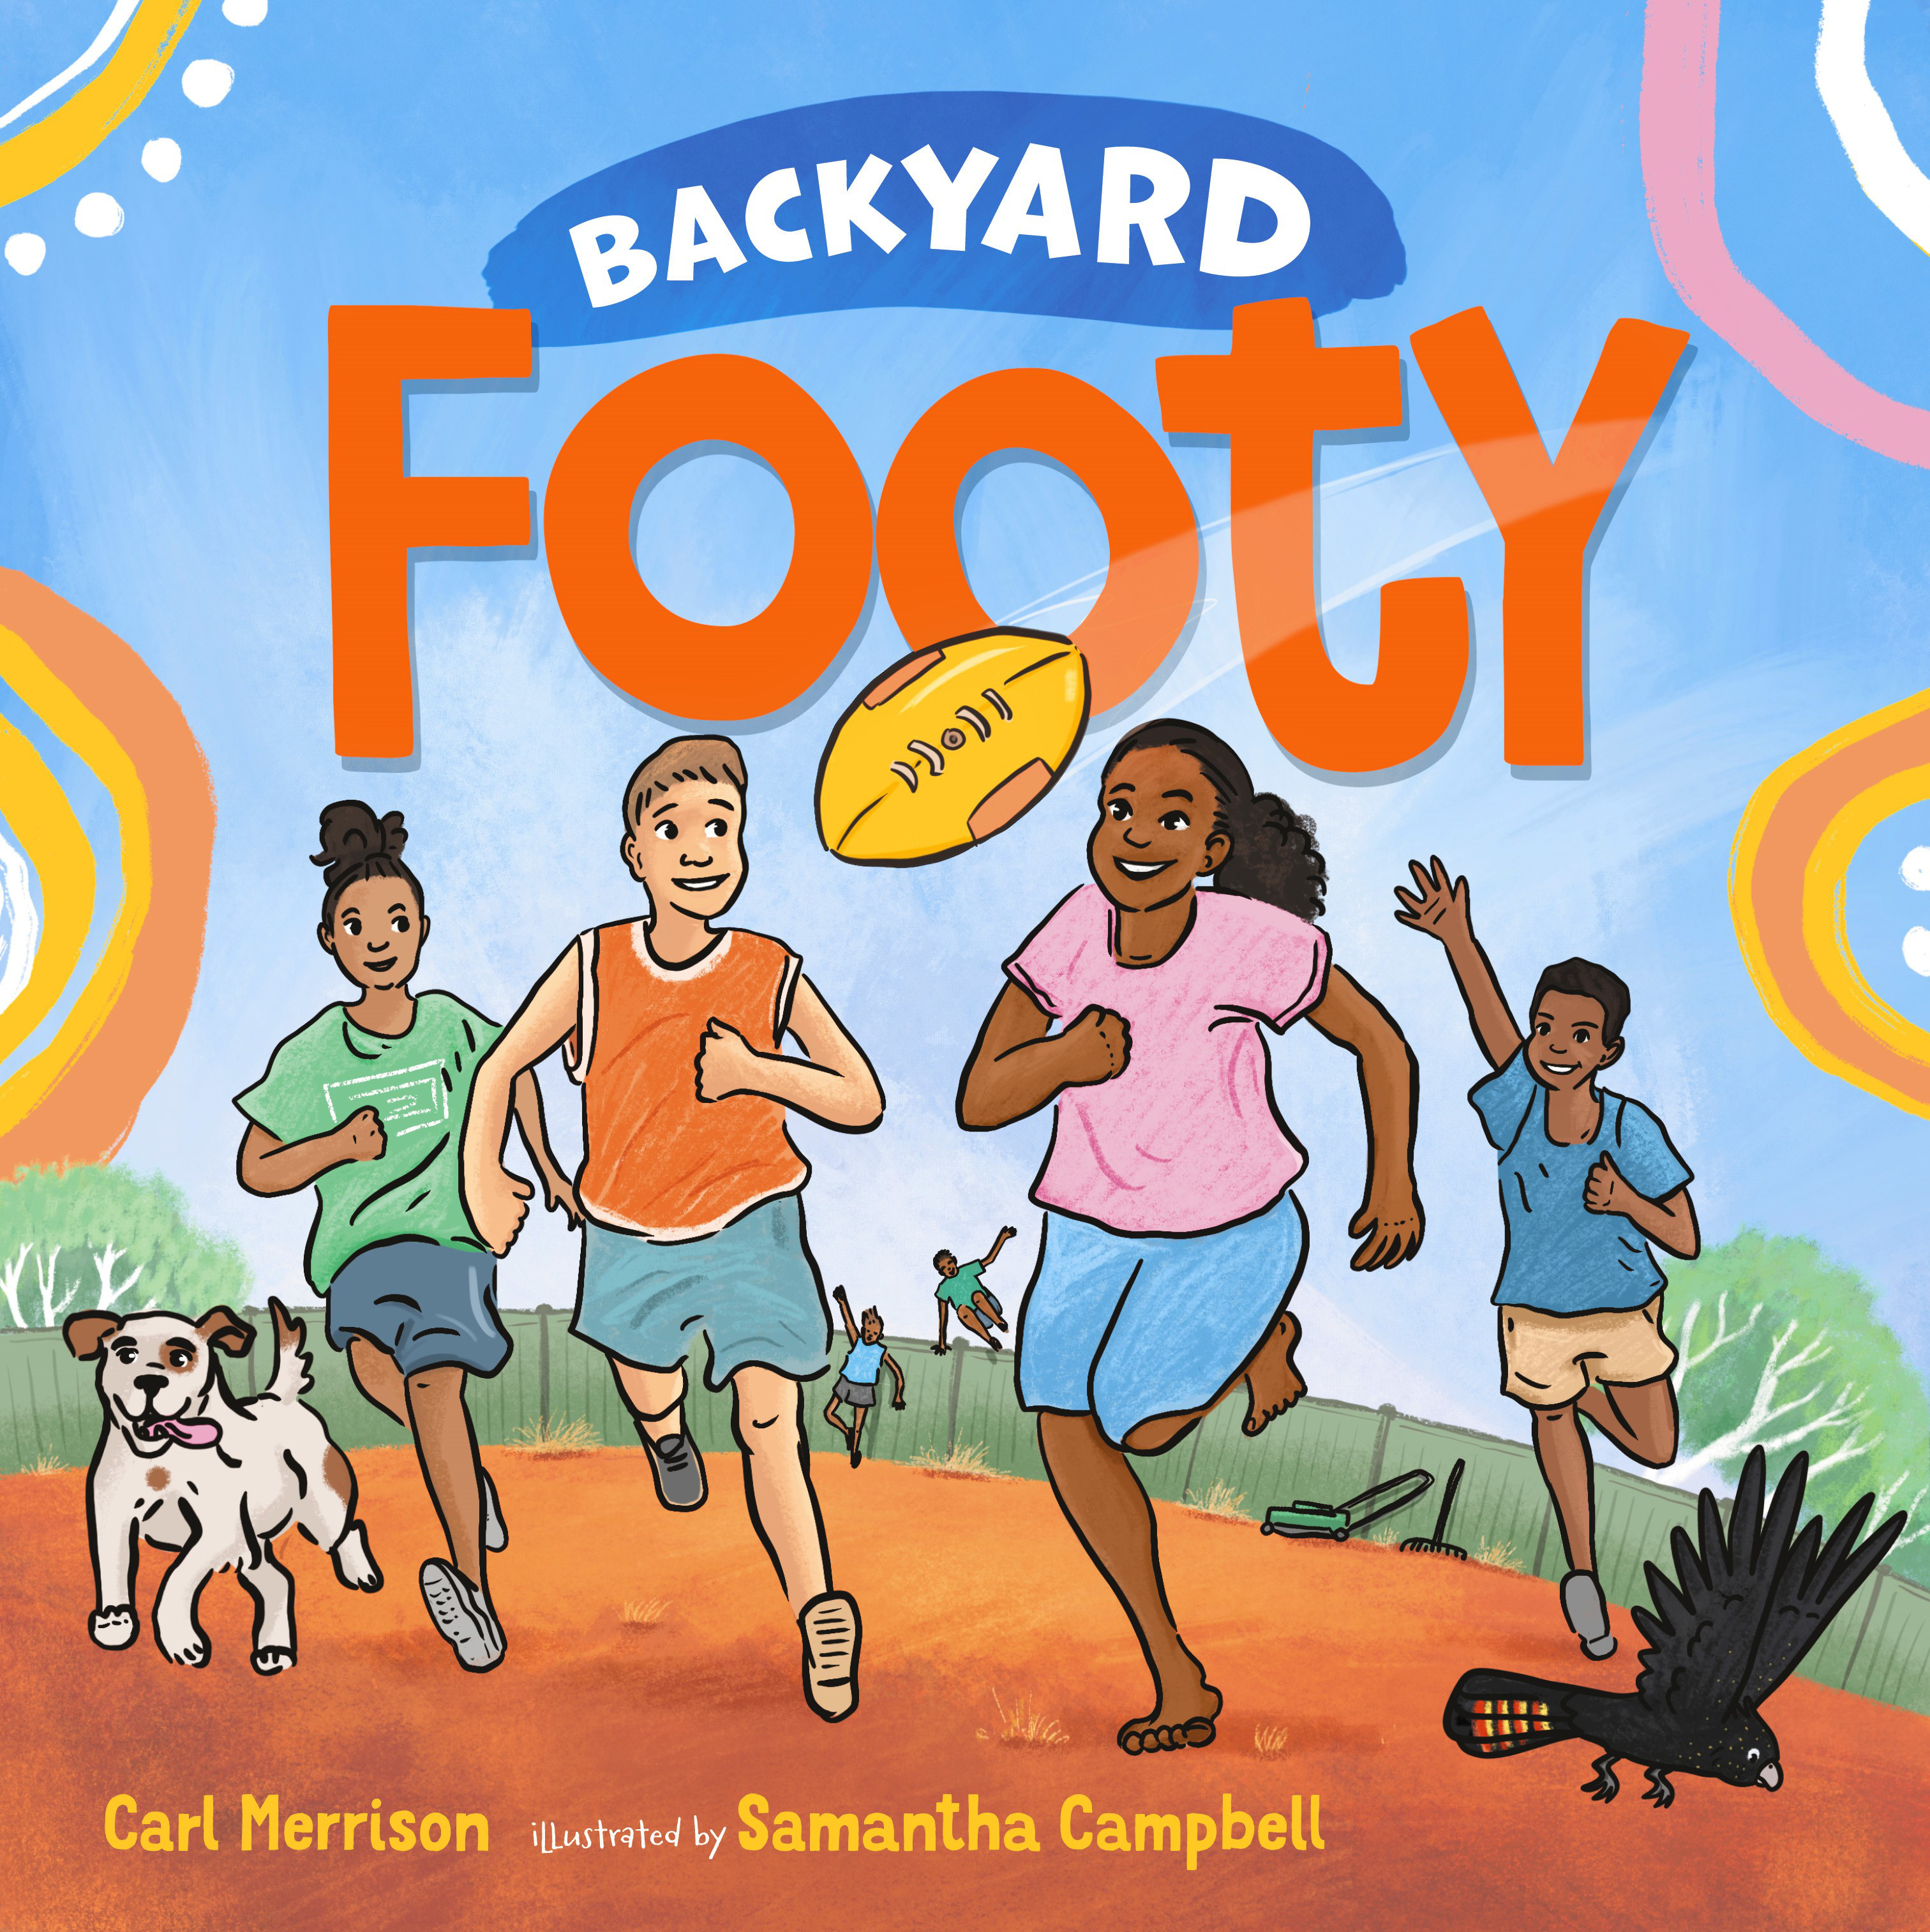 A colourful children's book cover showing four children running after a football. The text reads Backyard Footy by Carl Merrison and illustrated by Samantha Campbell